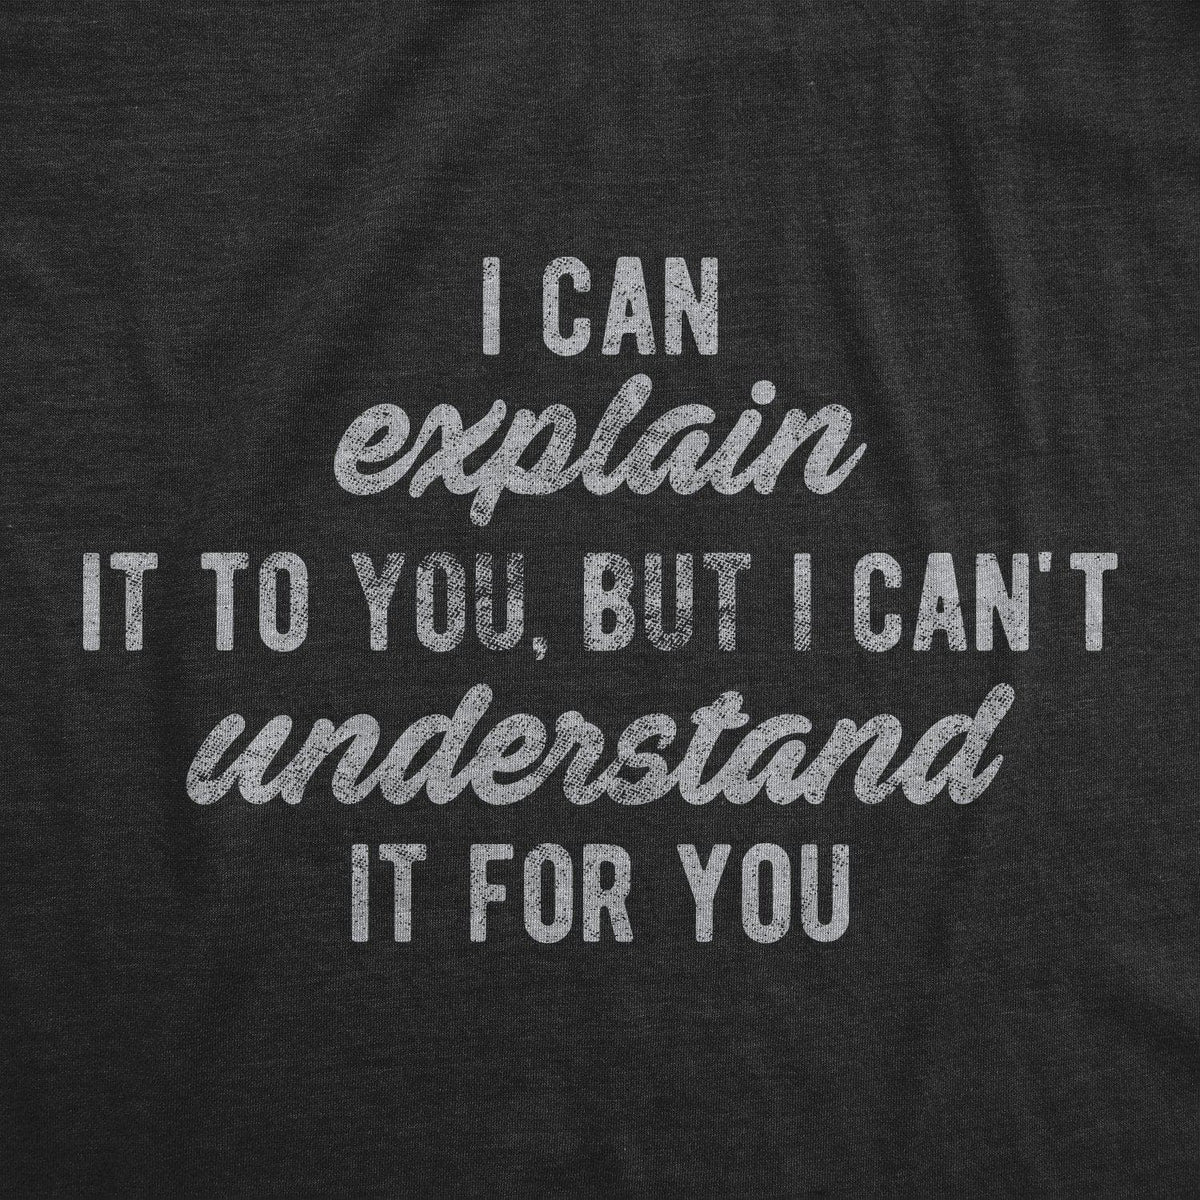 I Can&#39;t Understand It For You Women&#39;s Tshirt - Crazy Dog T-Shirts